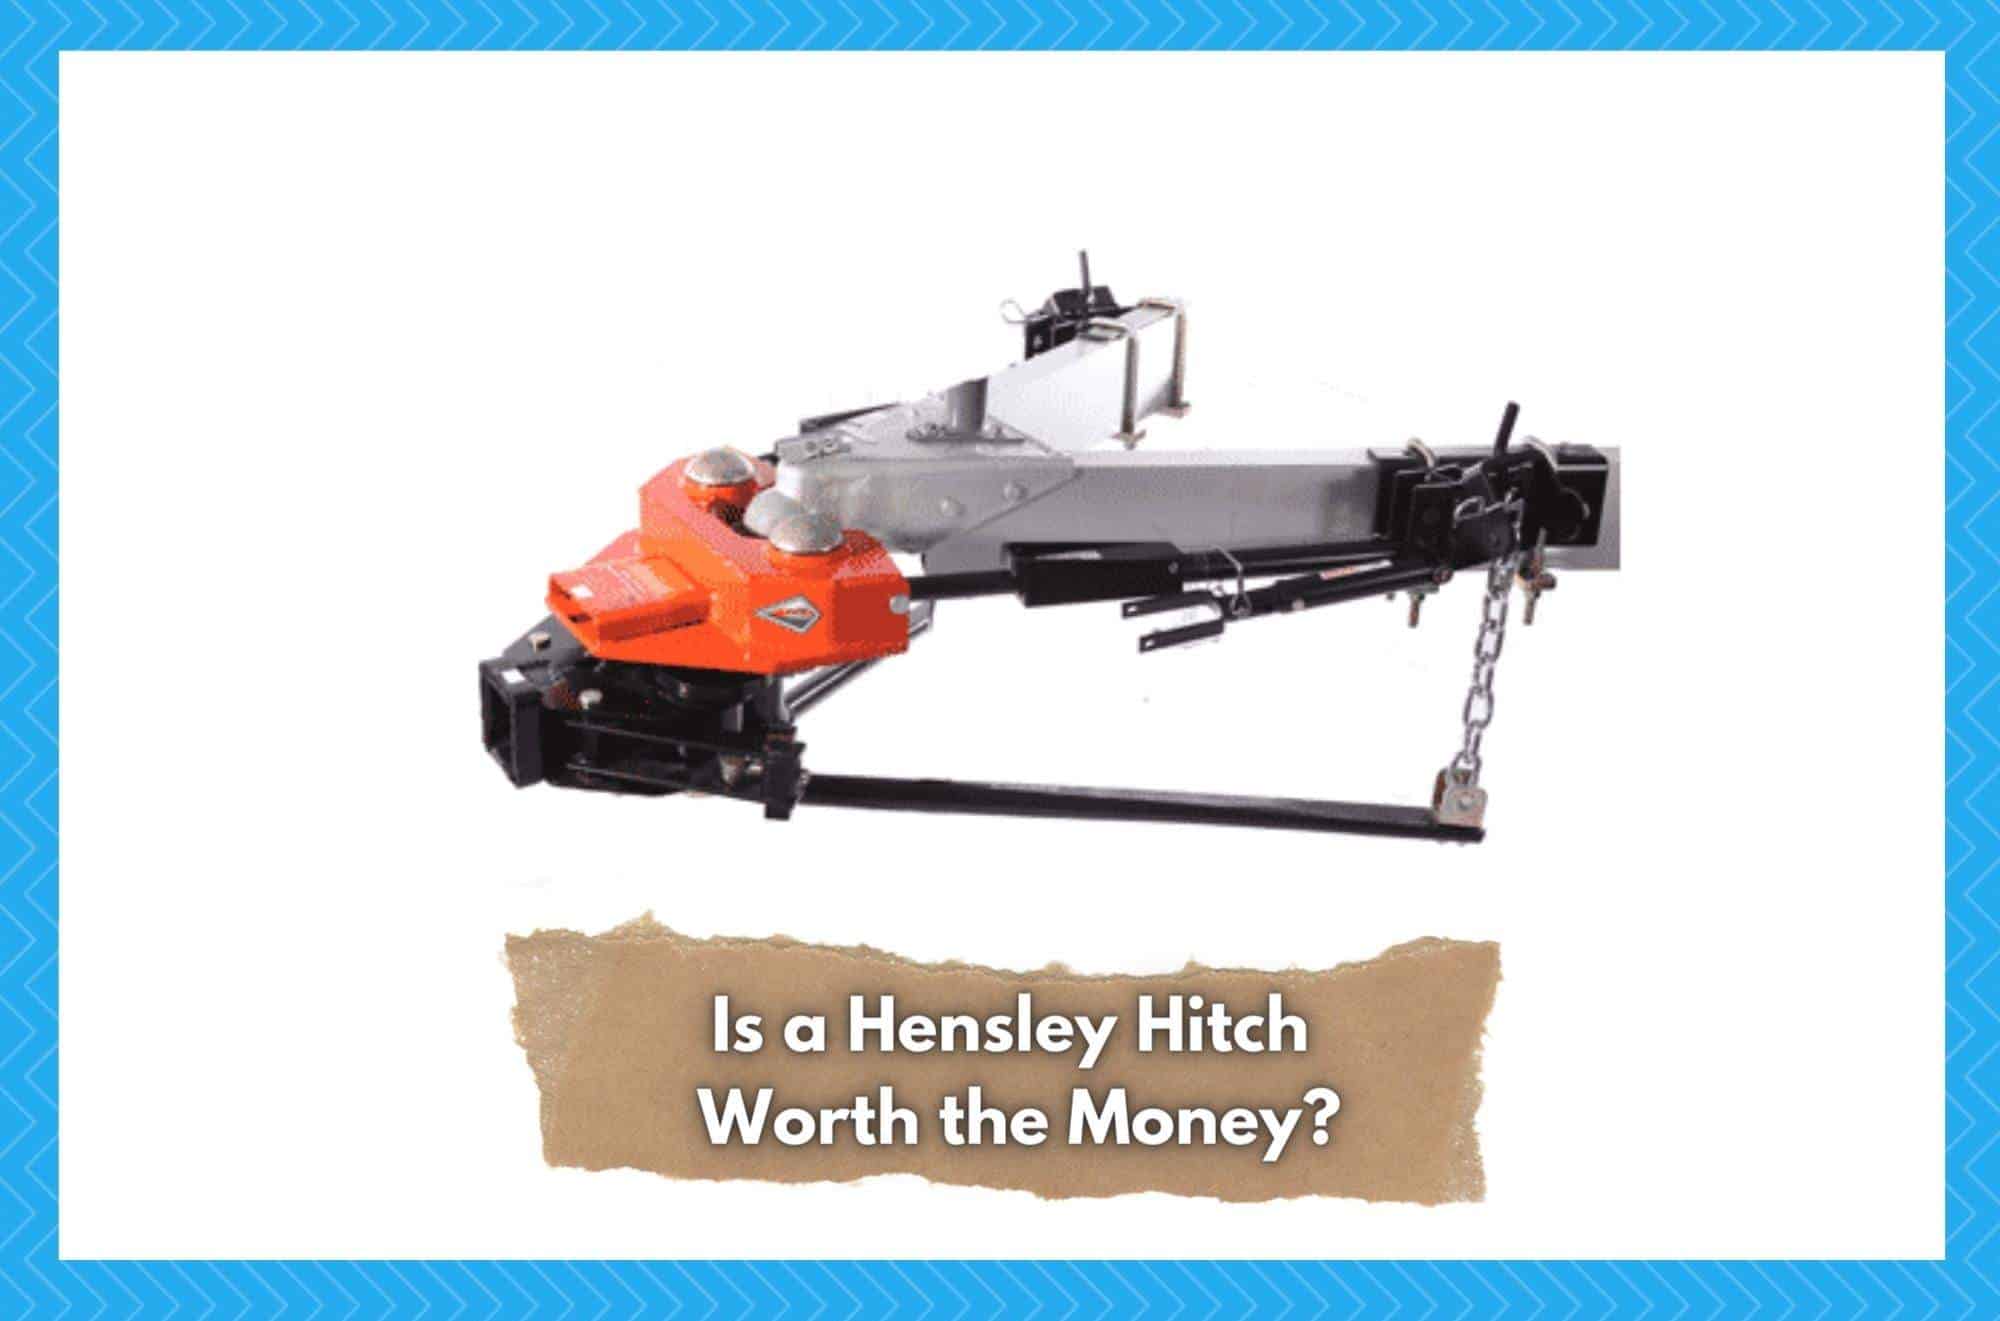 Is a Hensley Hitch Worth the Money?